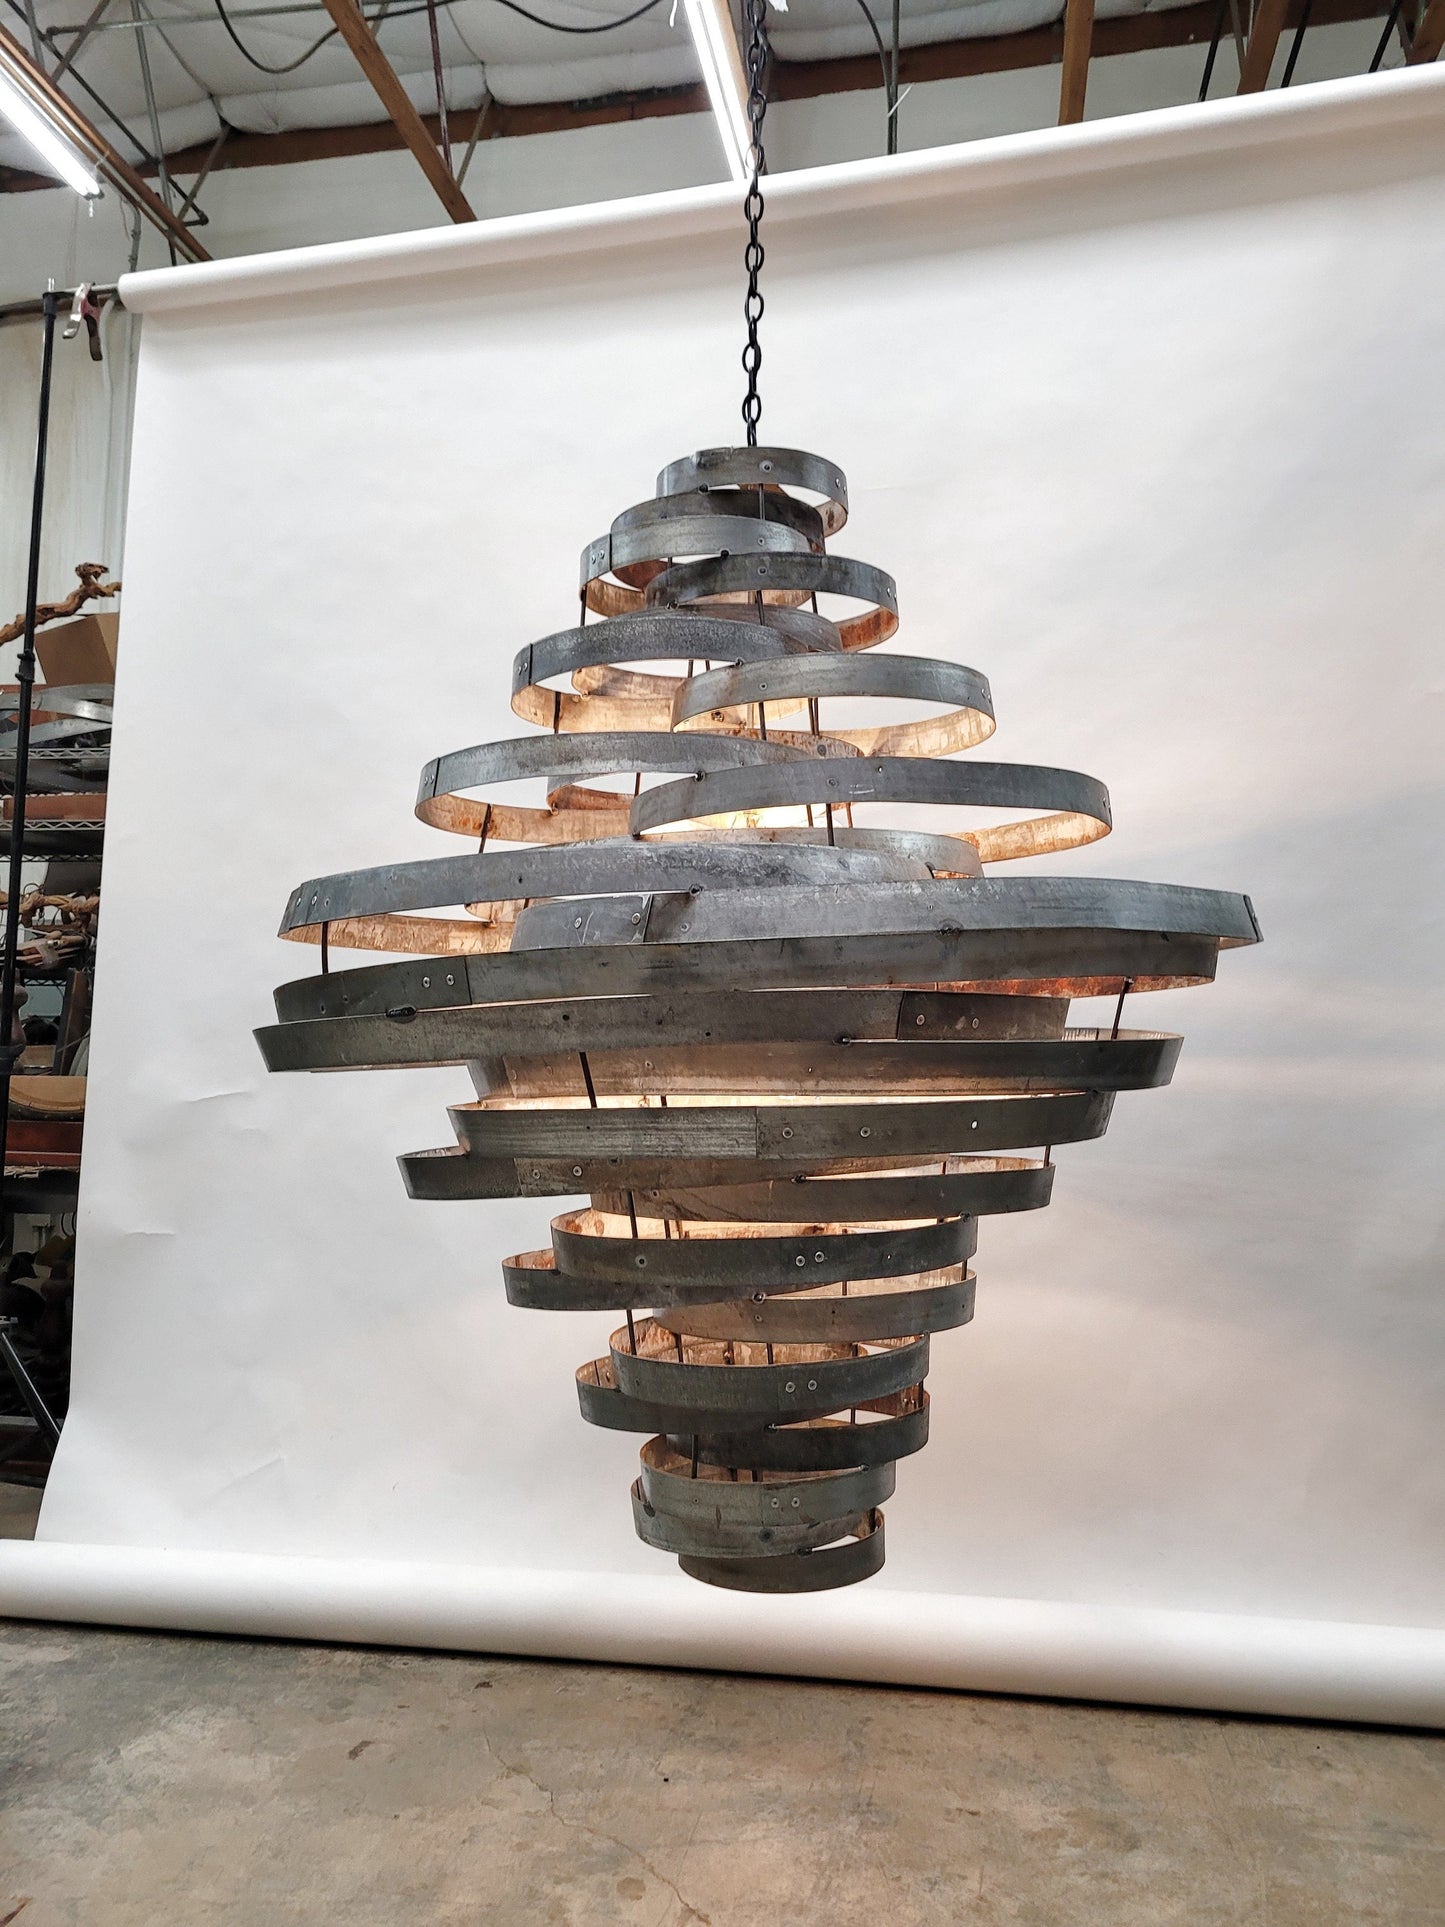 Wine Barrel Ring Large Space Chandelier - Tazza - Made from Retired California wine barrel rings. 100% Recycled!